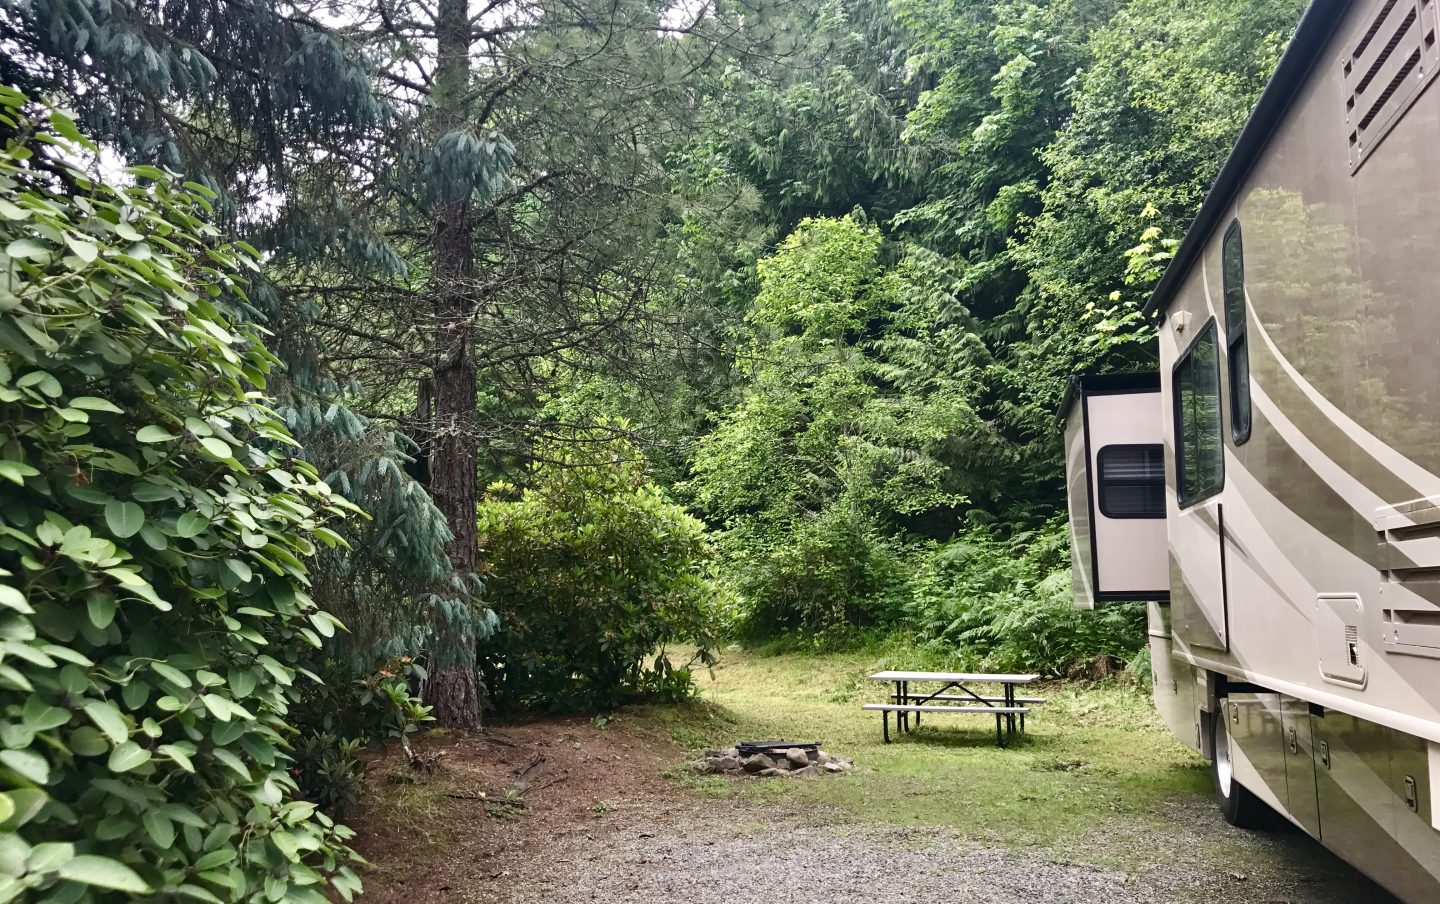 Our site was beautiful, and many other sites were nestled even more deeply into wooded spaces. There was still plenty of clearance for taller rigs.